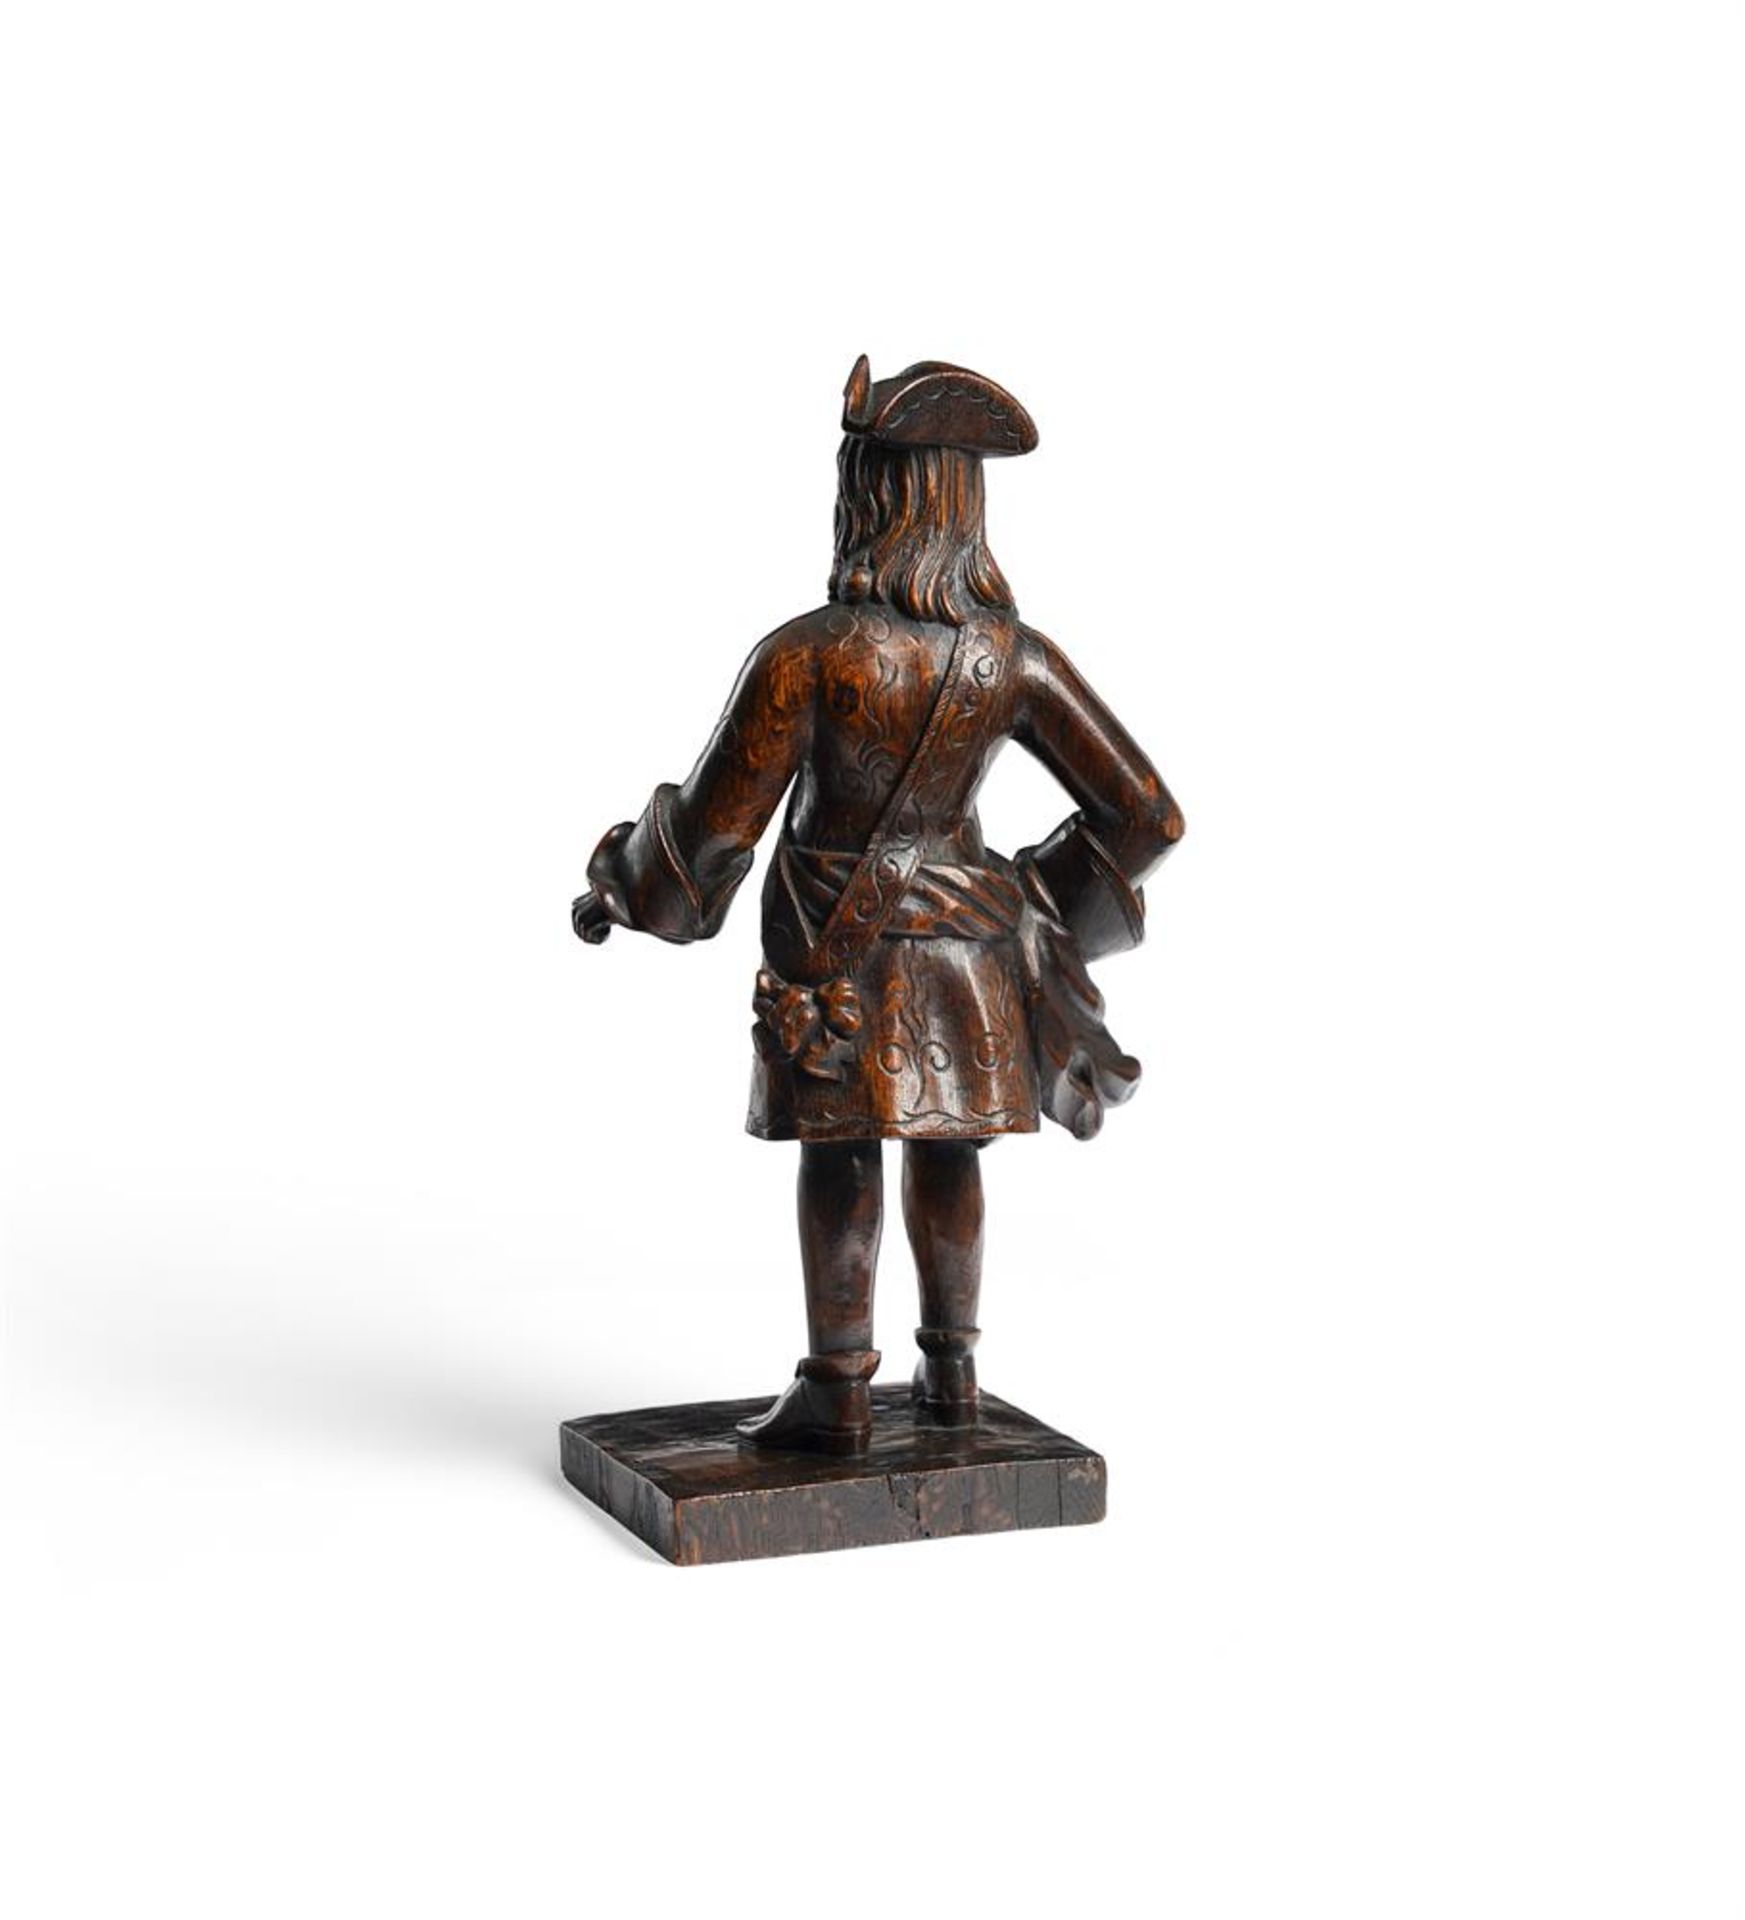 A RARE CARVED OAK MODEL OF A EUROPEAN MERCHANT OR ARMY OFFICER, 18TH CENTURY - Image 4 of 5